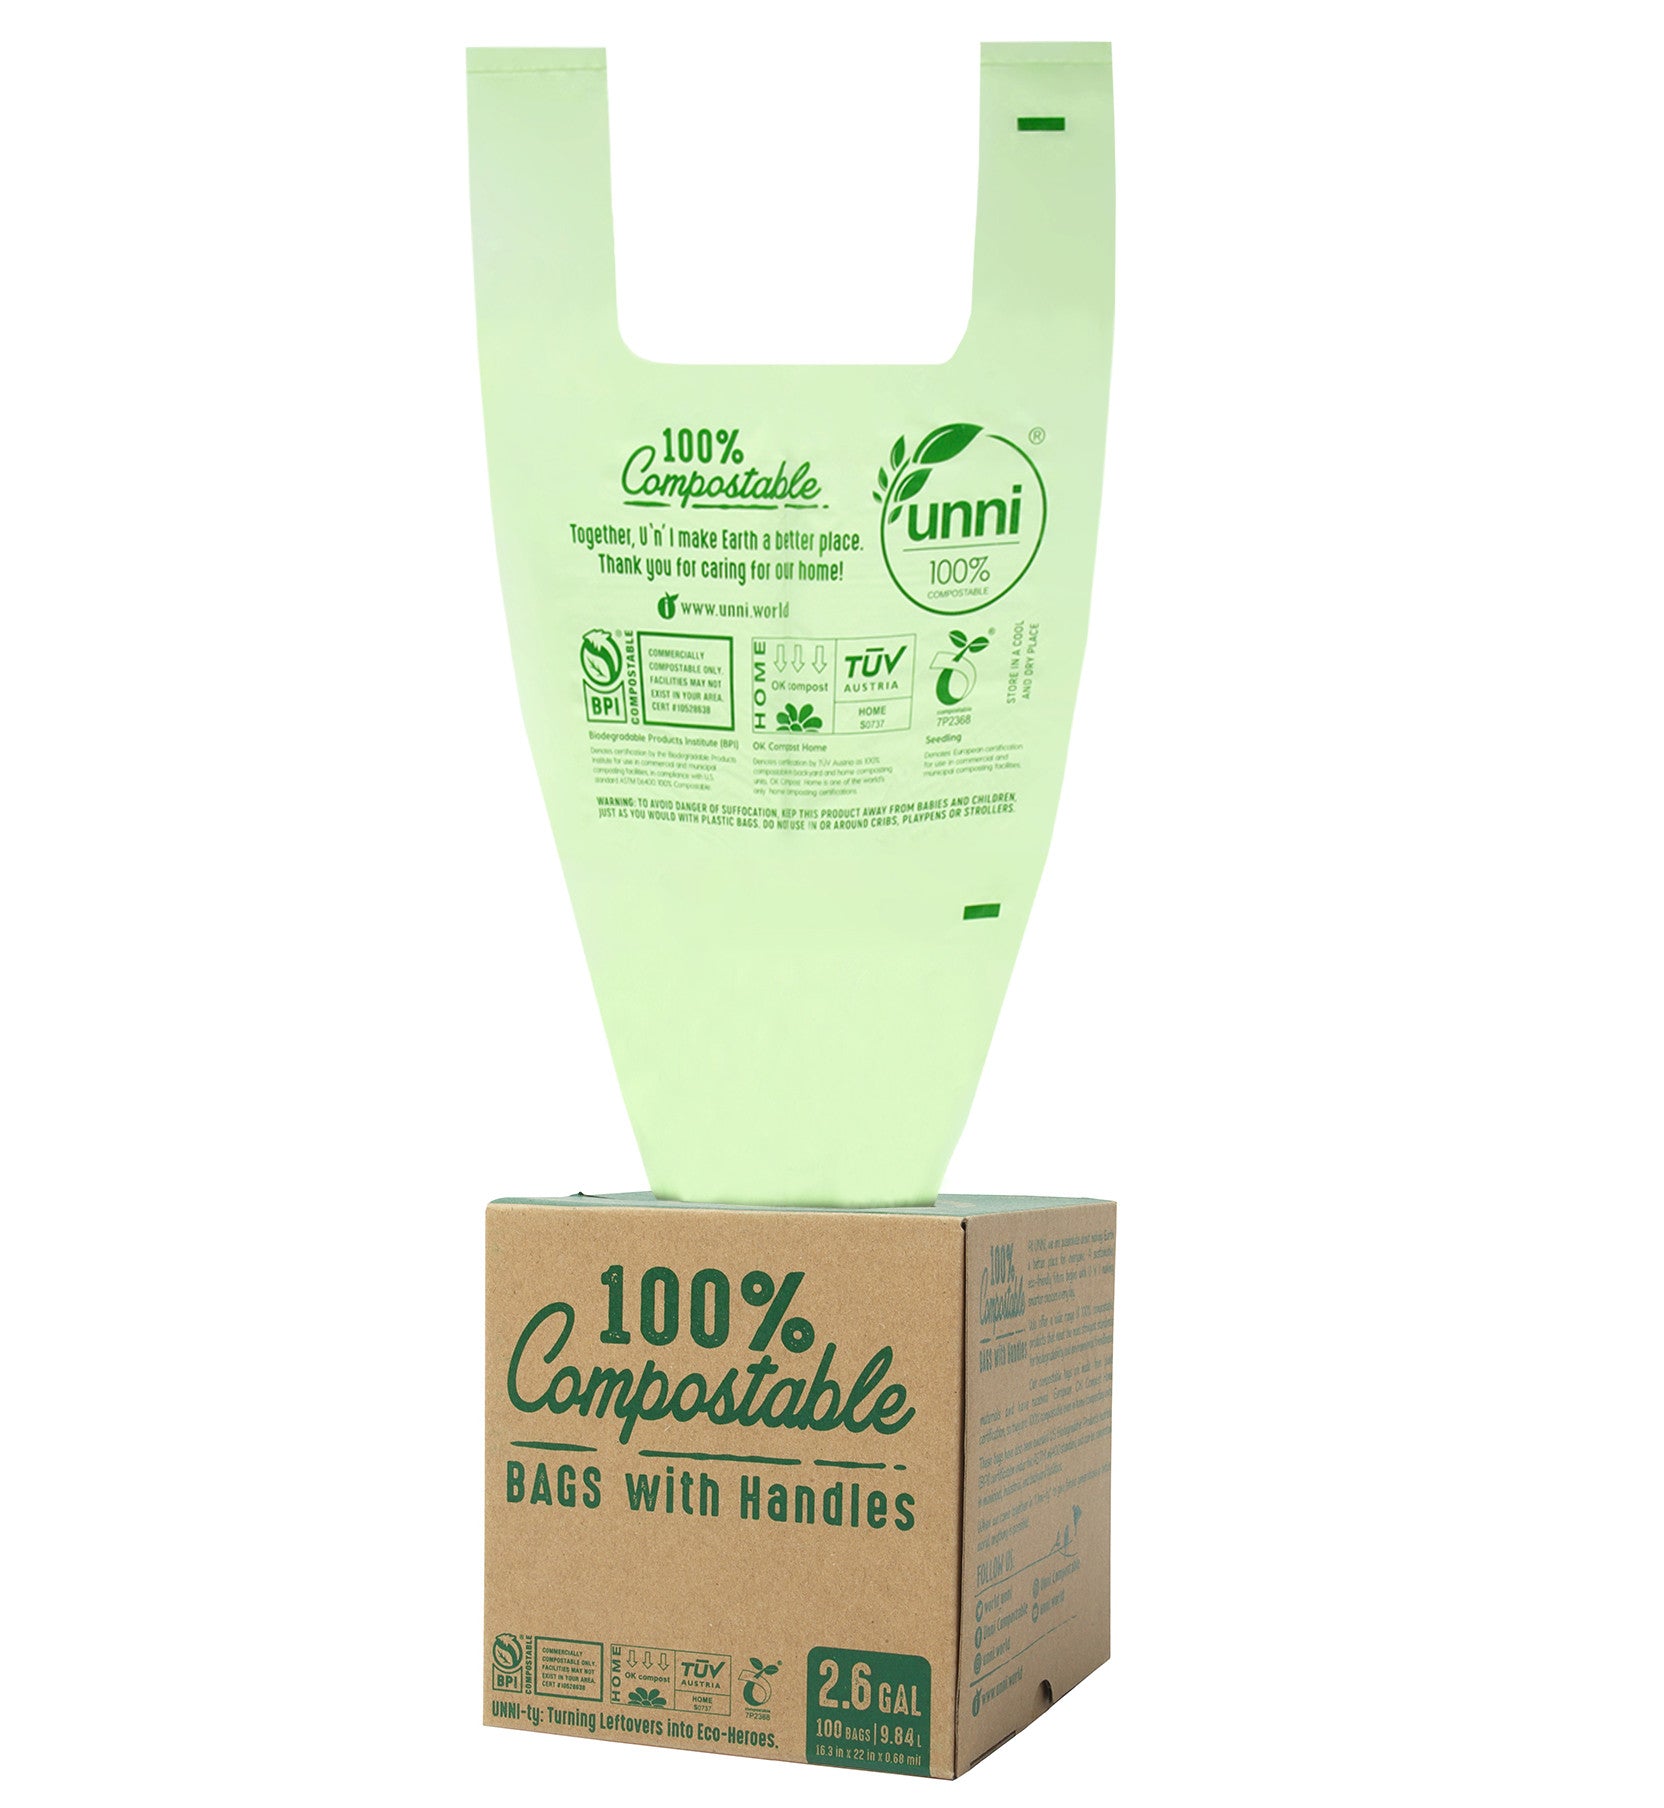 2.6 Gallon, 9.84 Liter, Compostable Bags with Handles